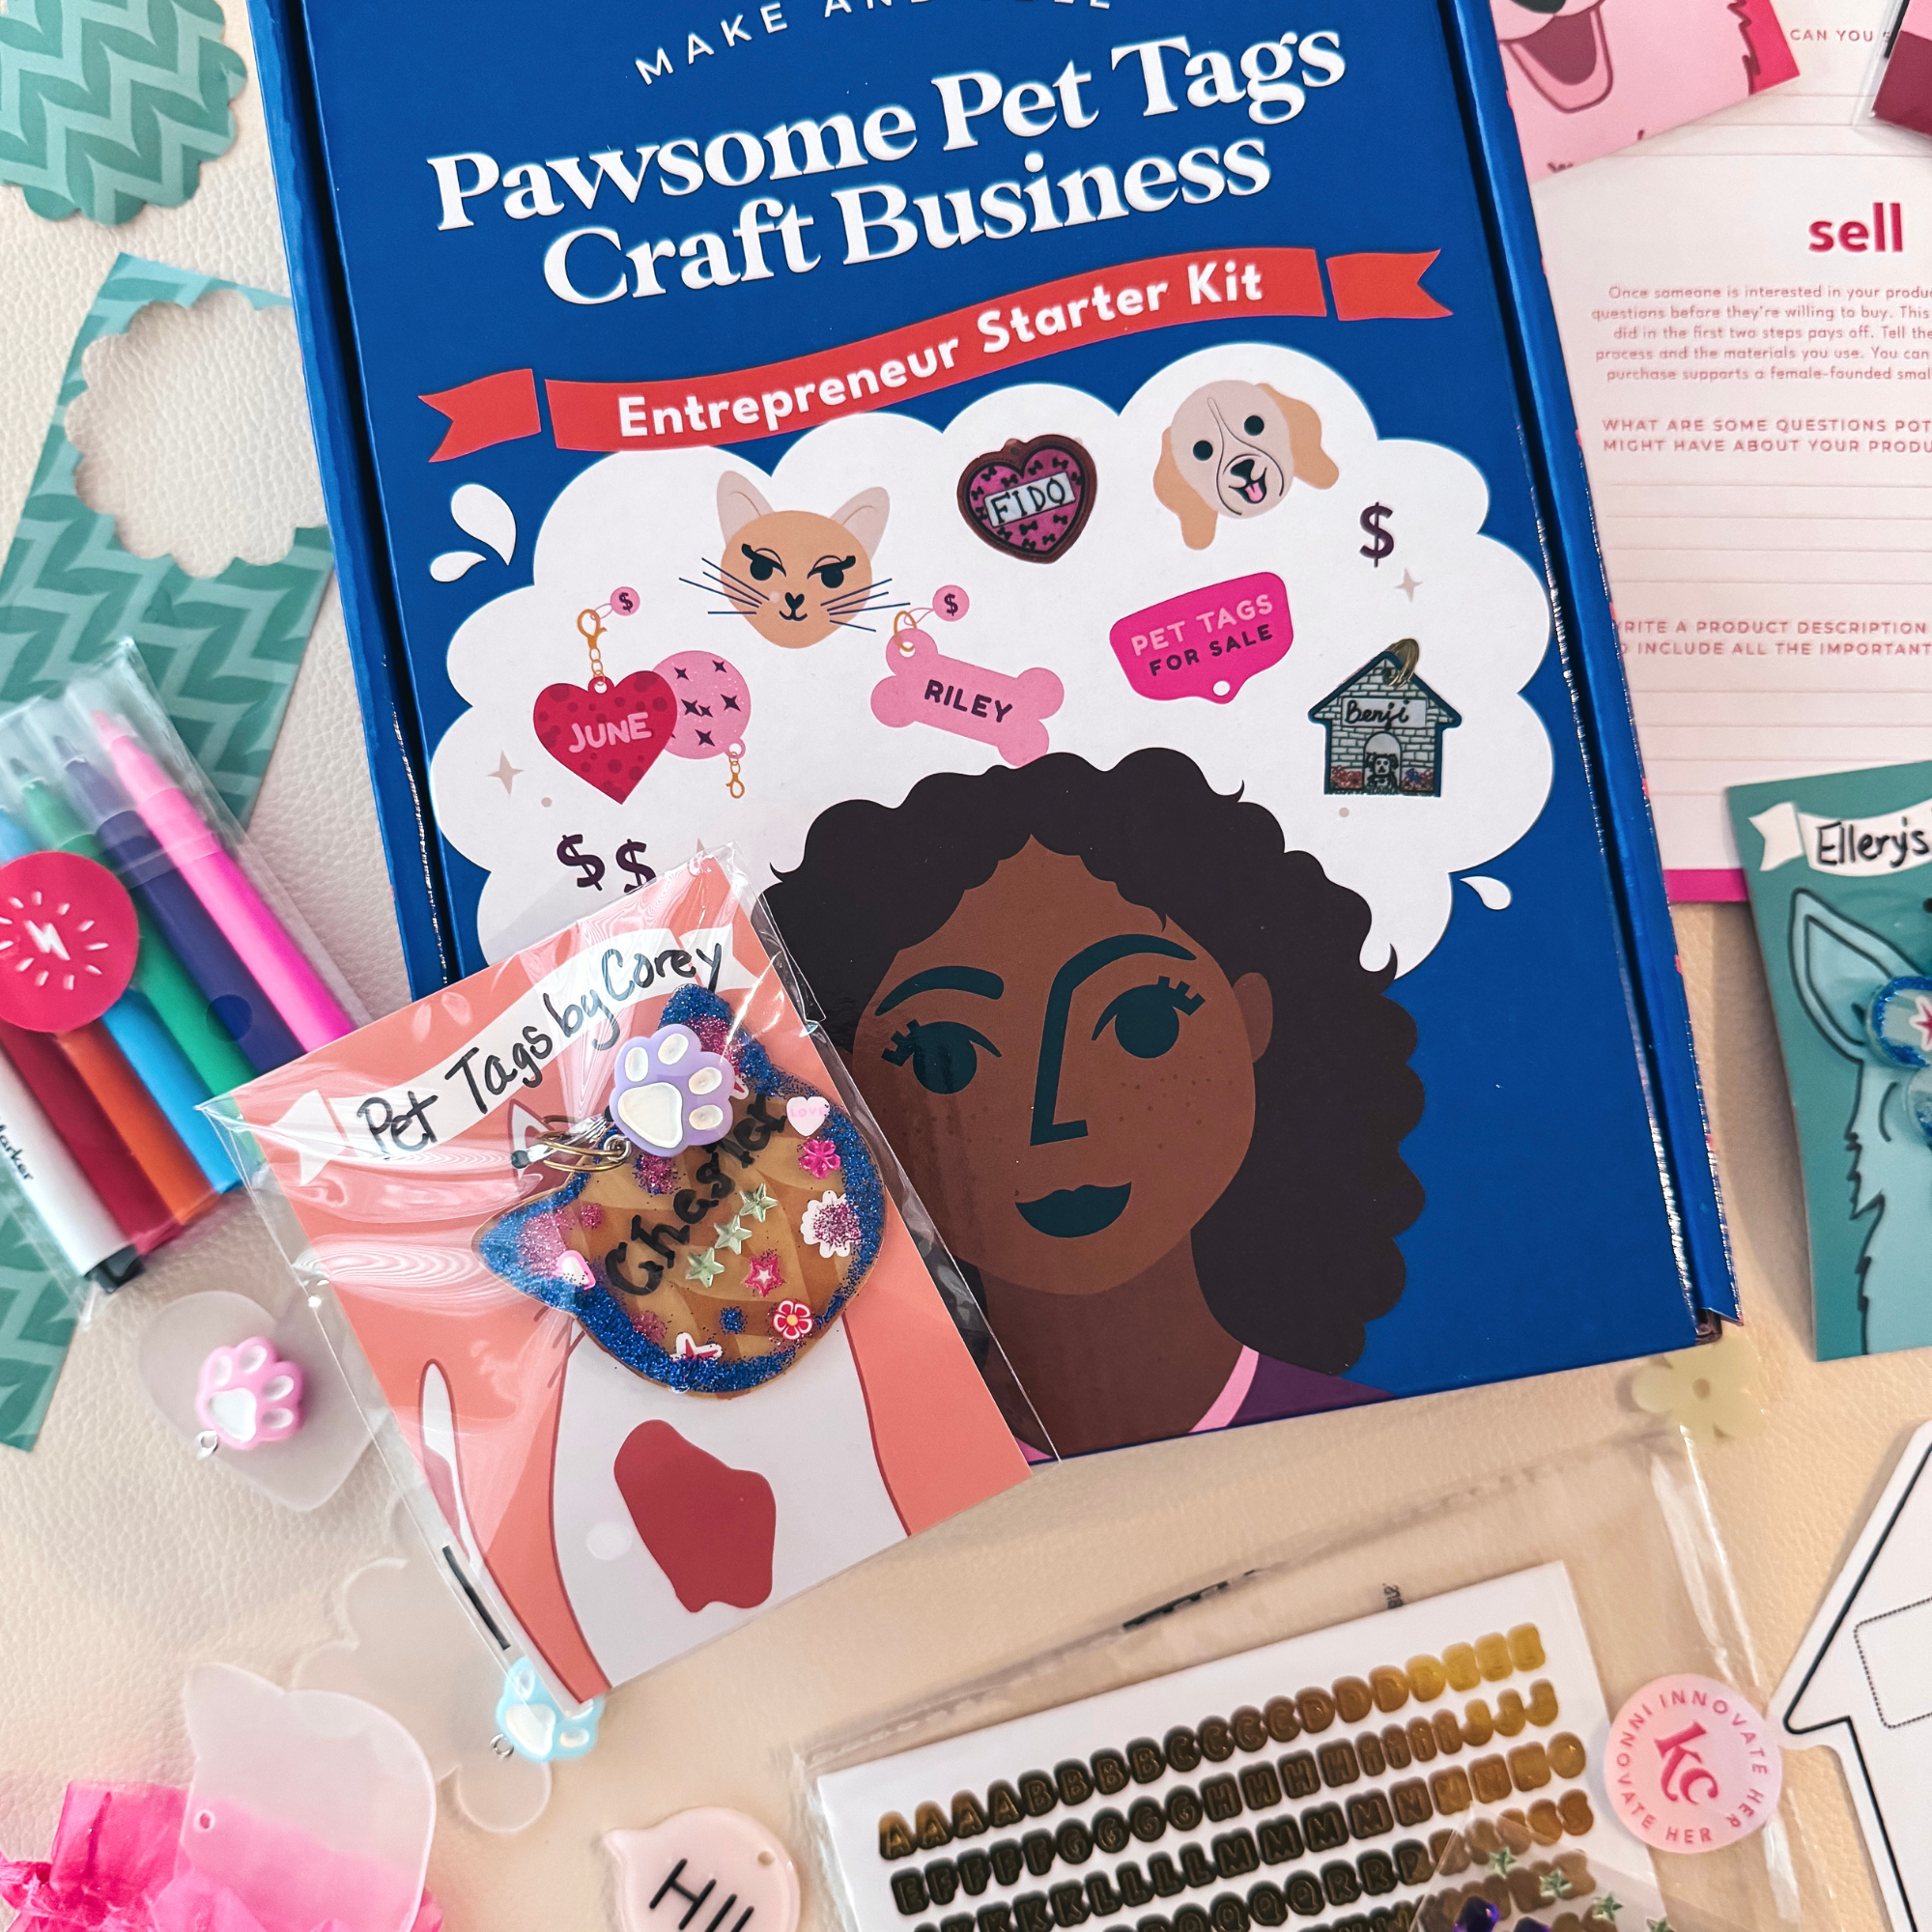 Make & Sell Pet Tags Business